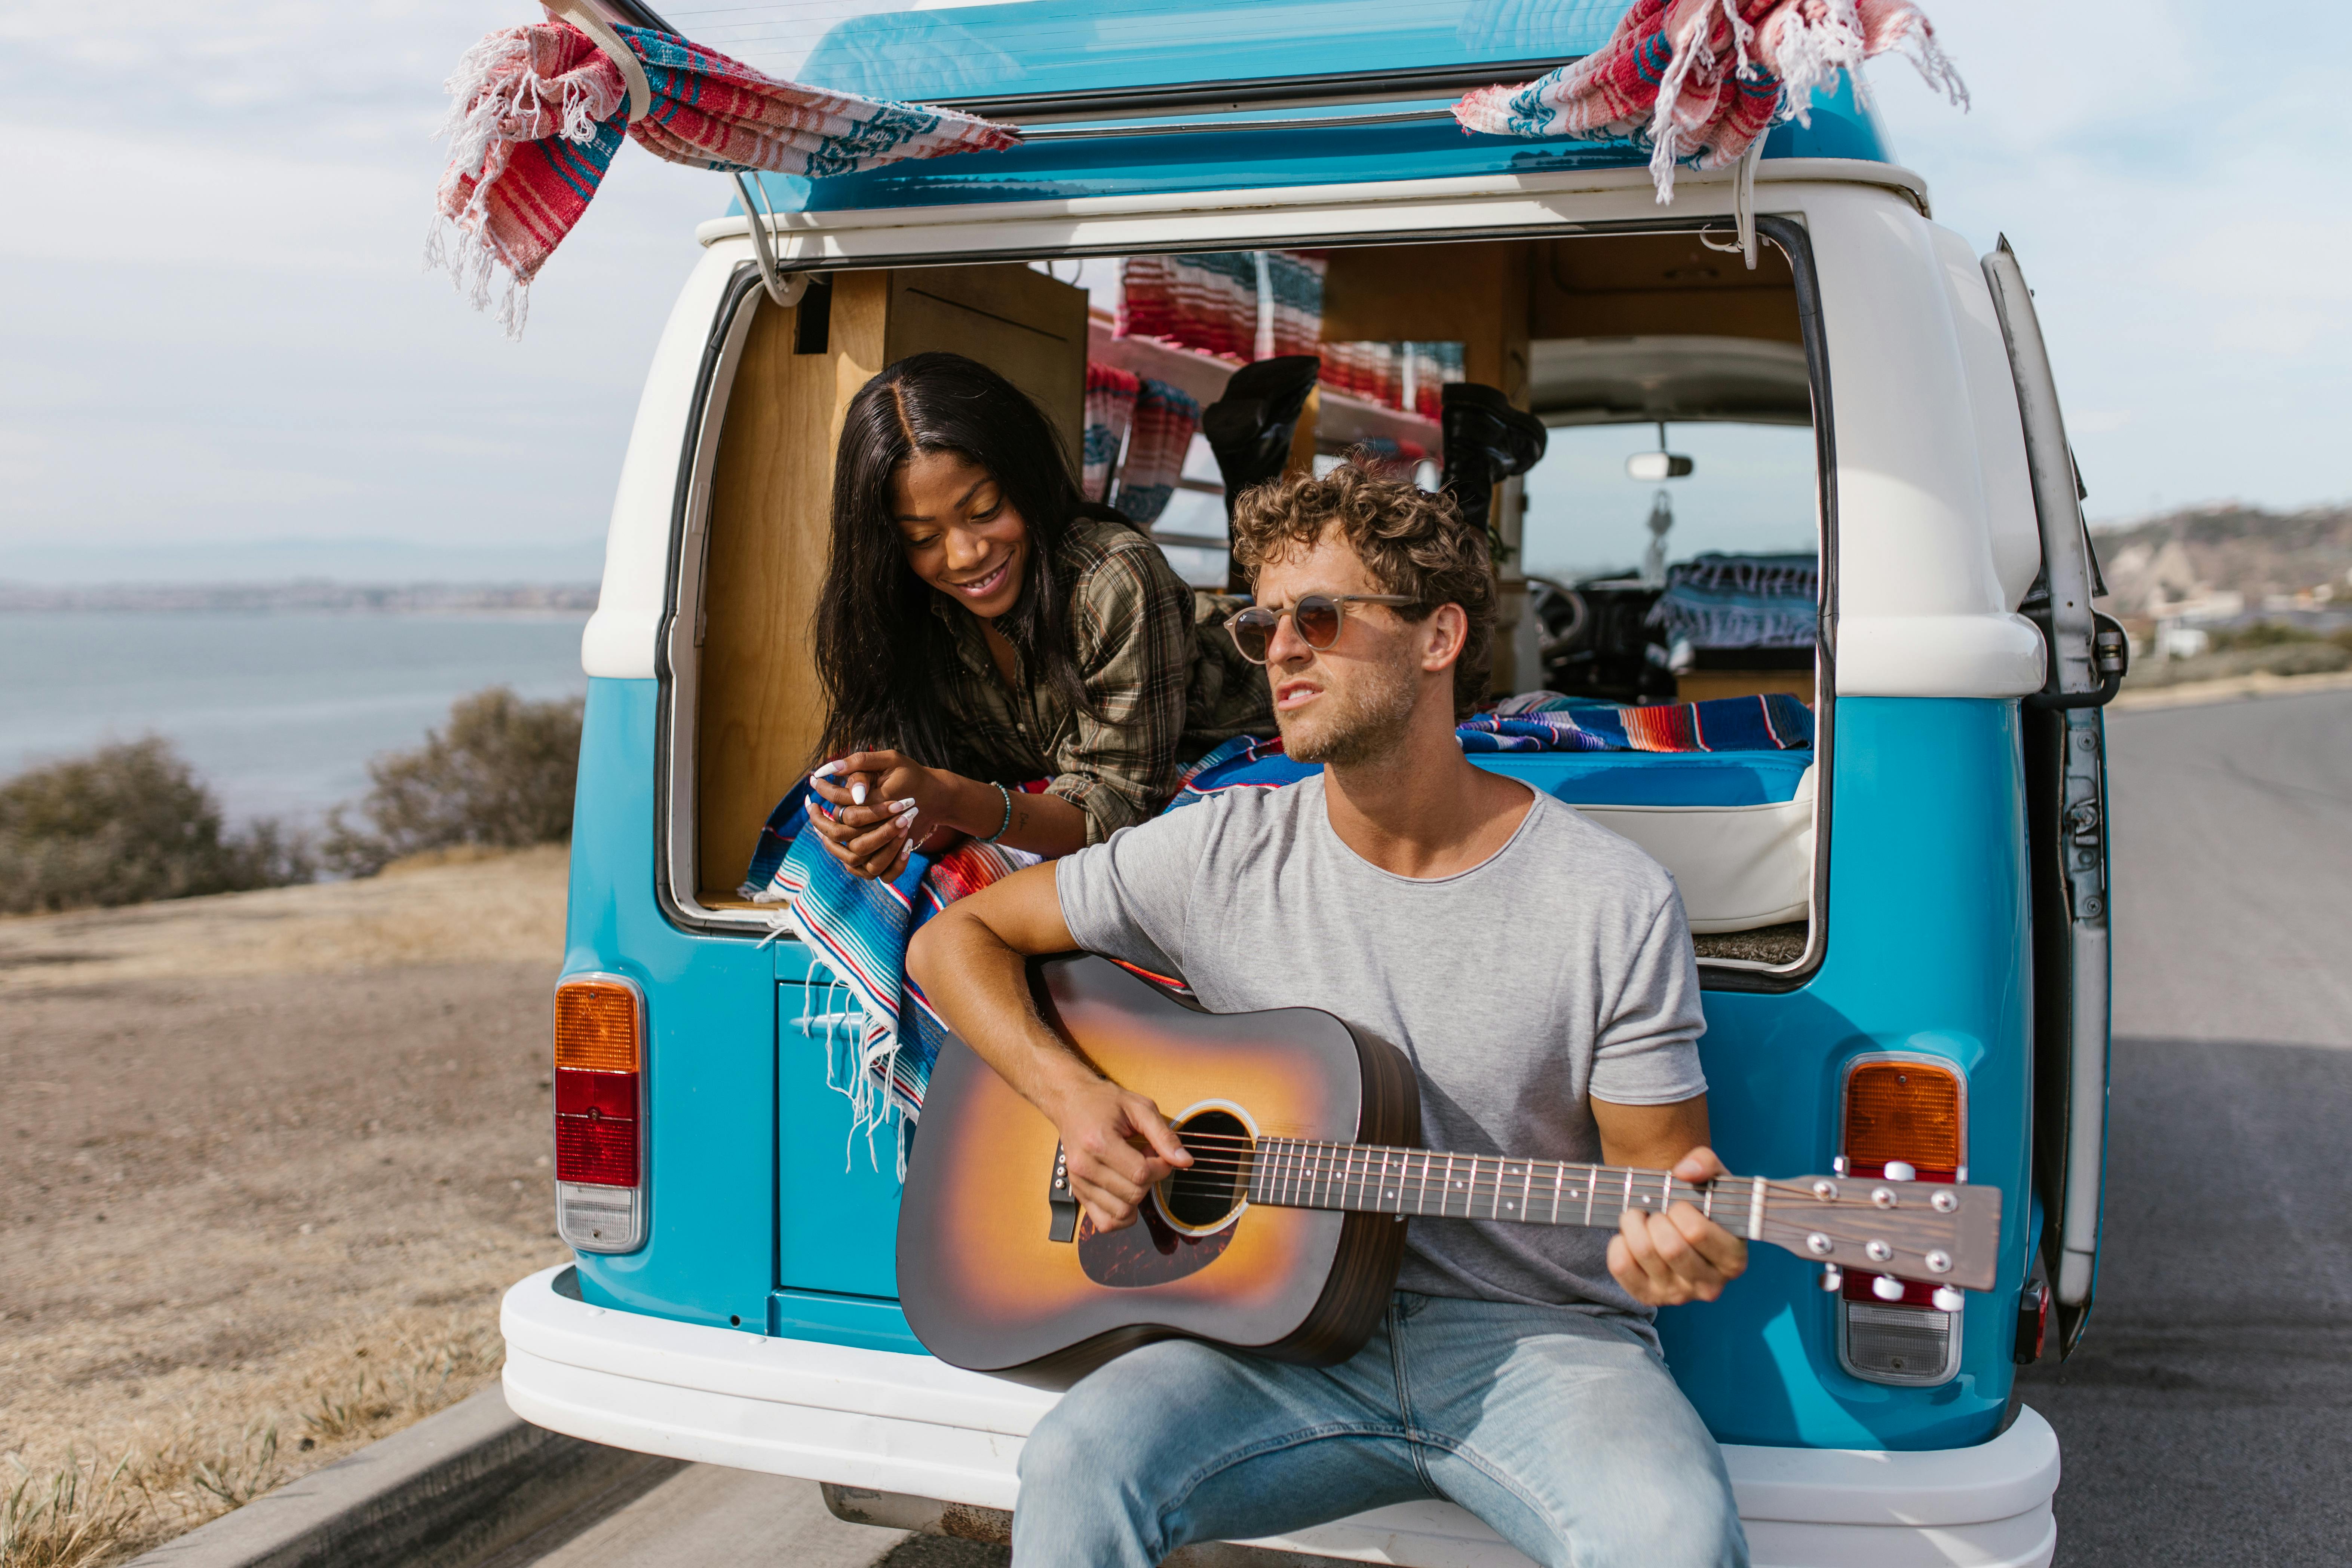 a woman lying in the van watching a man play the guitar